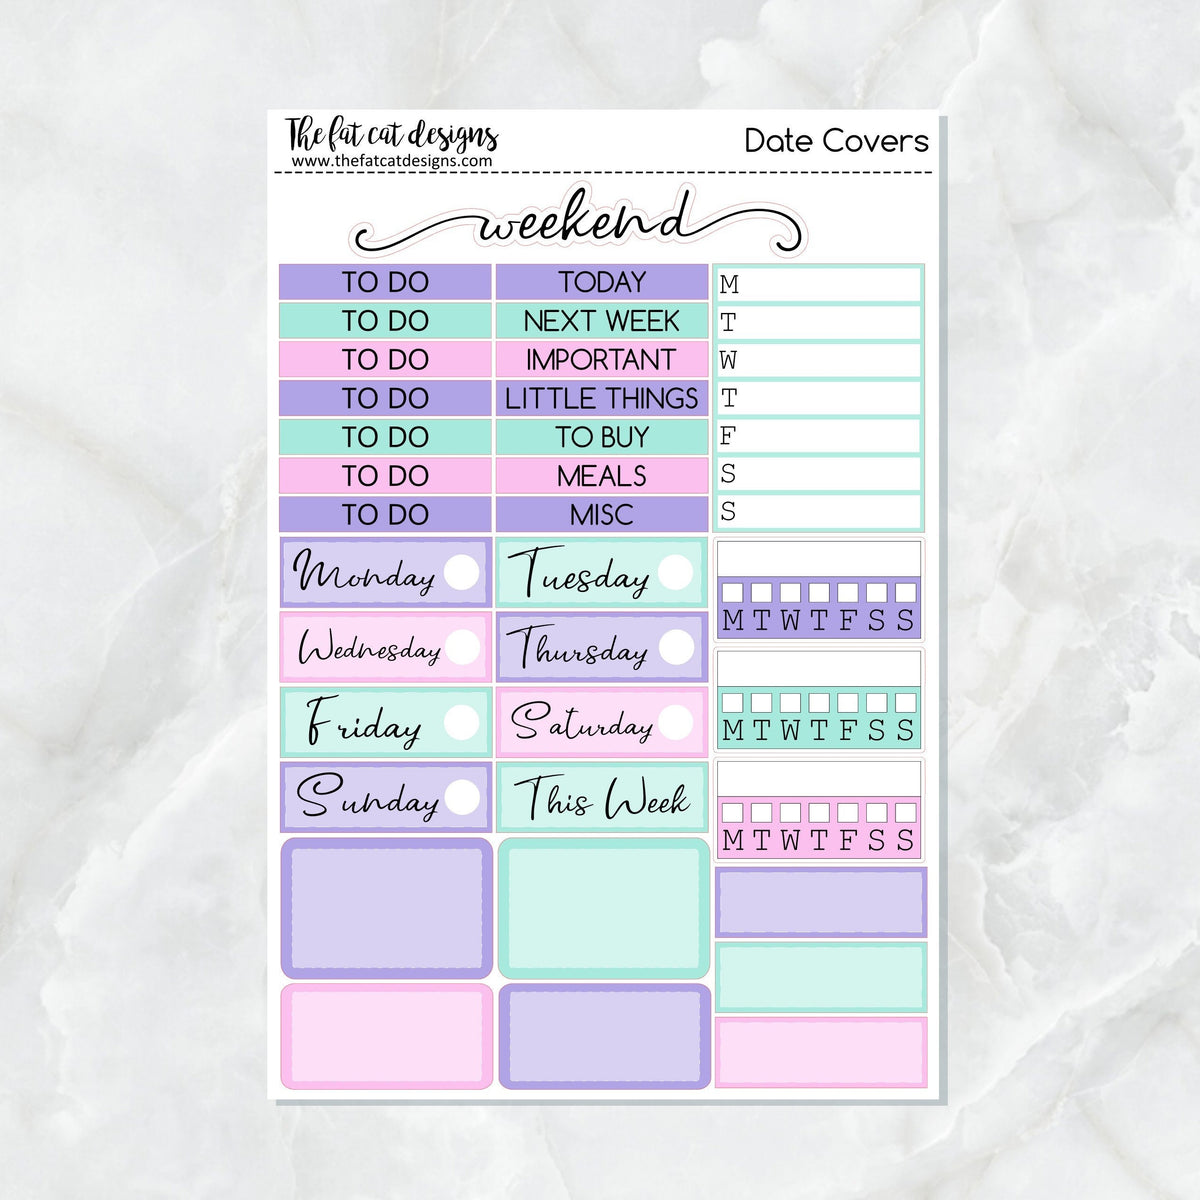 Creepy Cute Family planner stickers - Pastel goth stickers – The Planner's  World